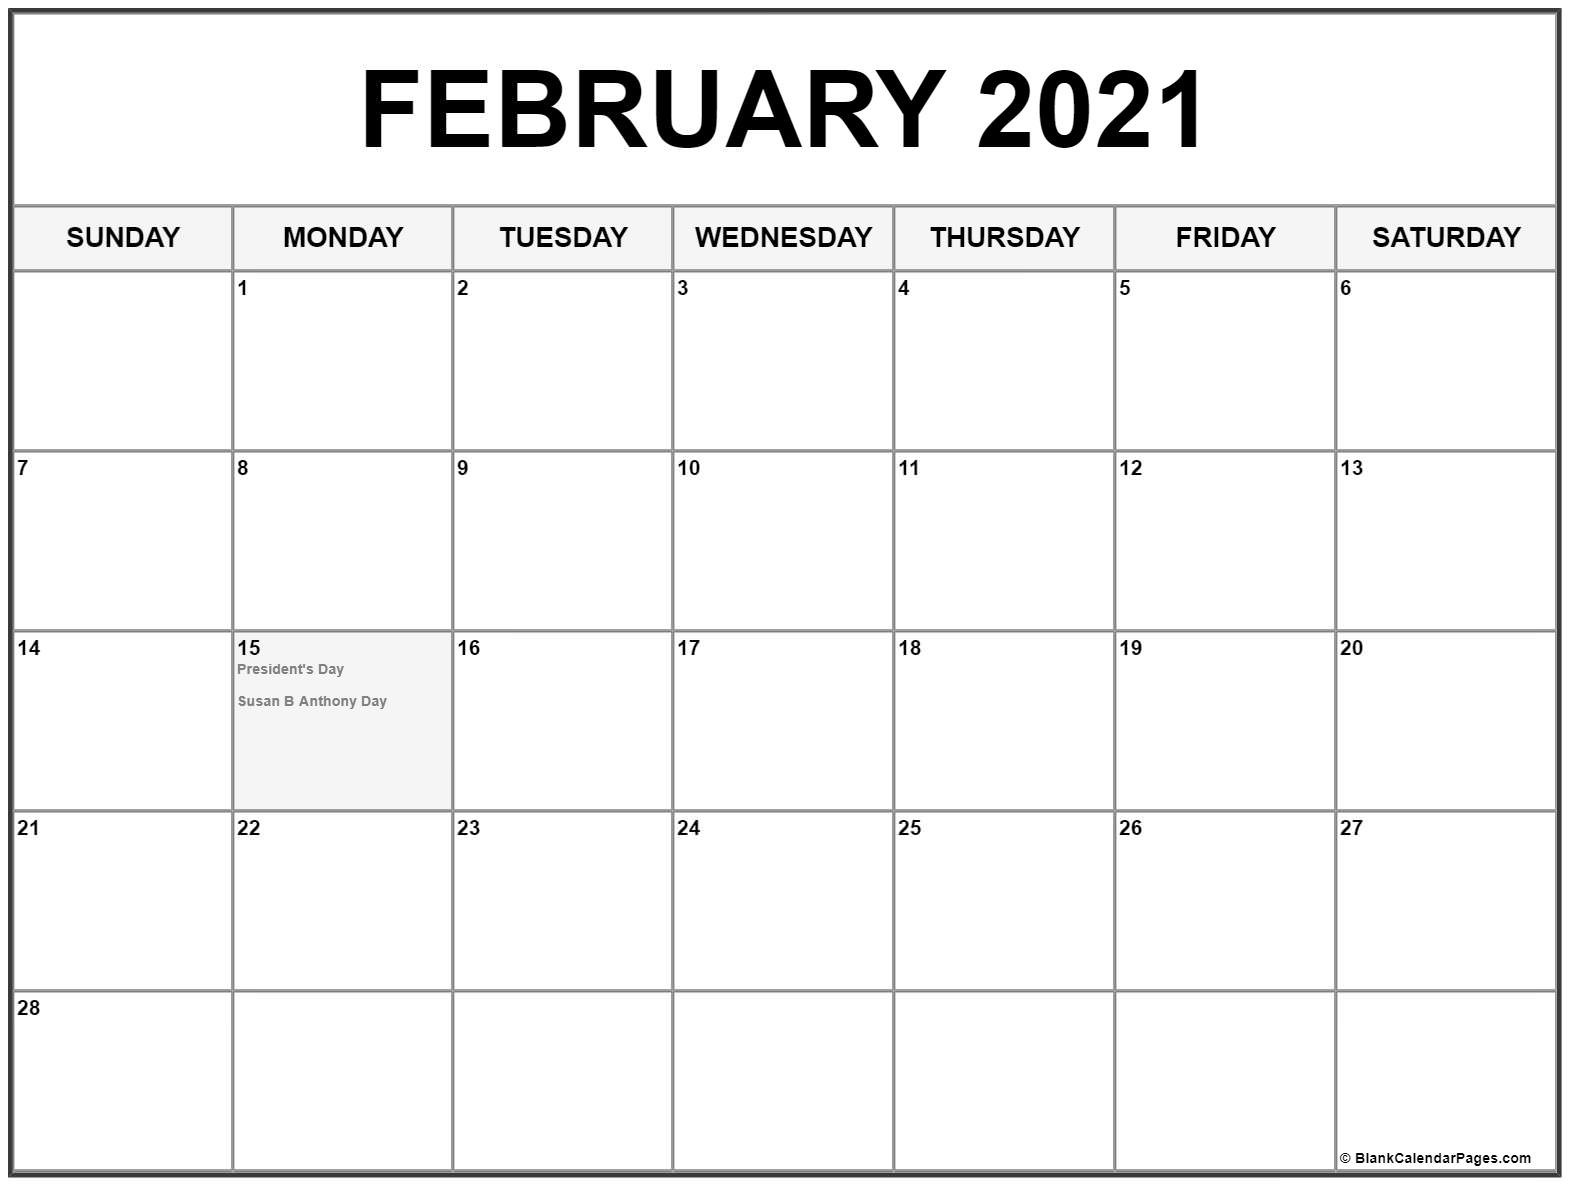 collection of february 2021 calendars with holidays